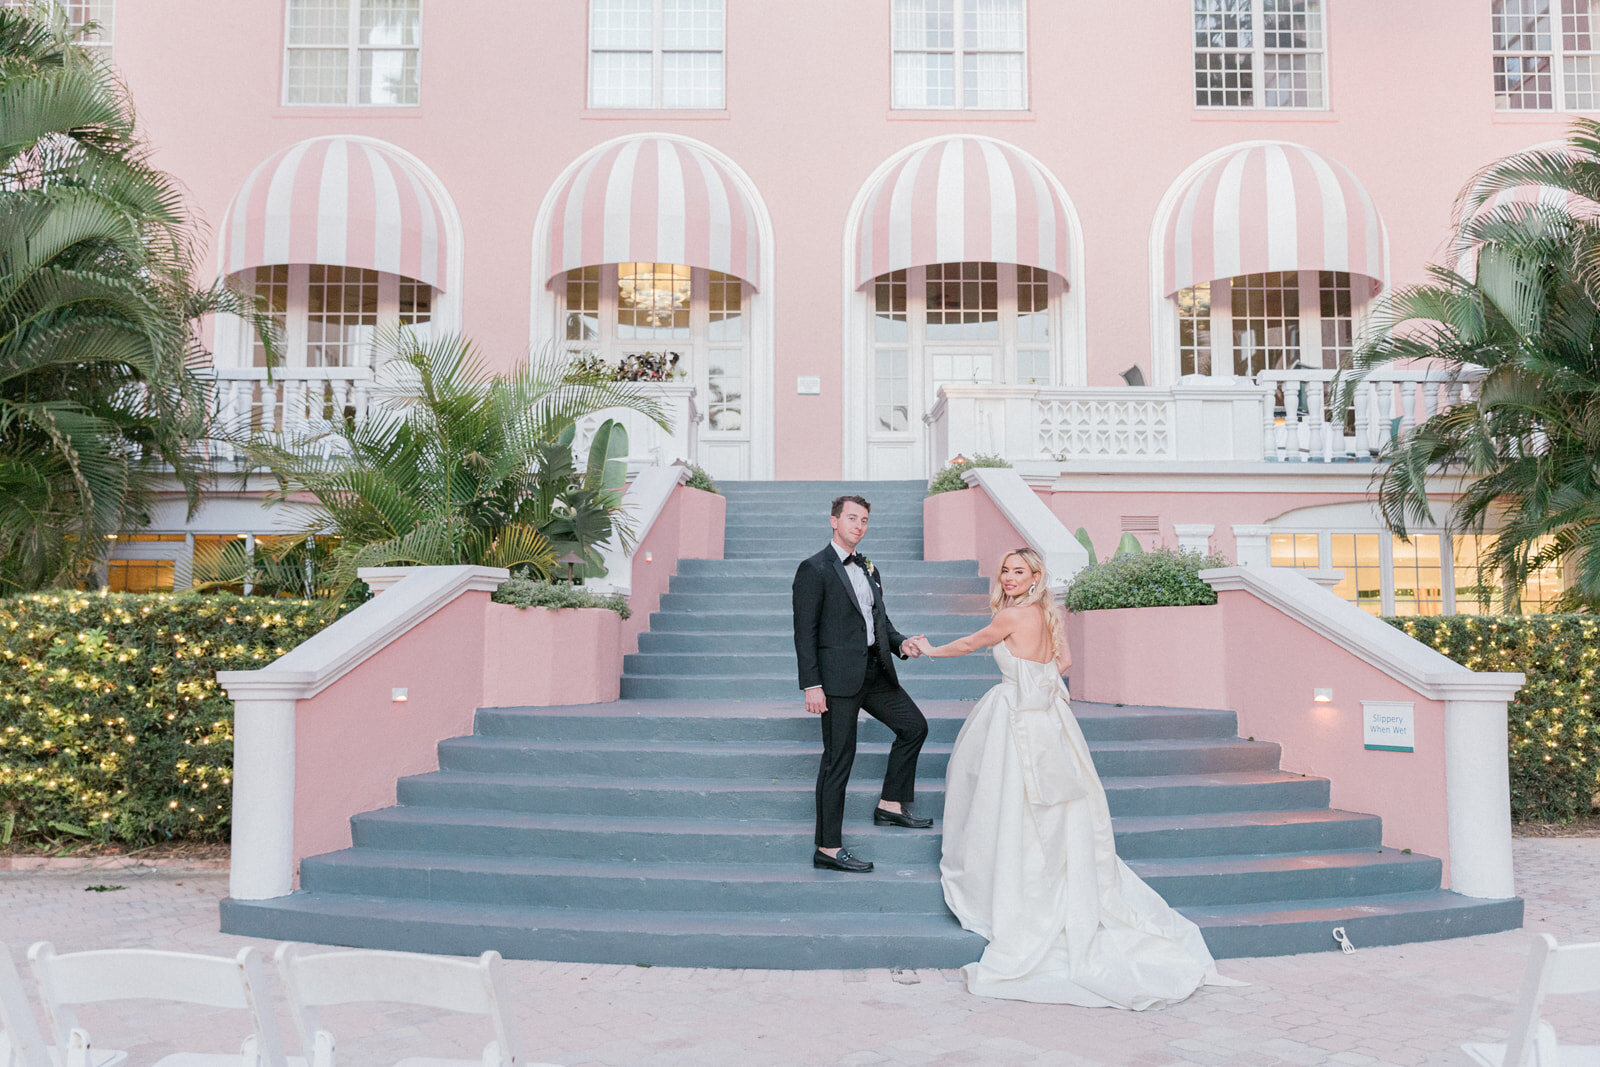 The most popular wedding venues in Tampa Bay, St. Pete Beach South West Florida. Wedding planning locations, venues, and planners.